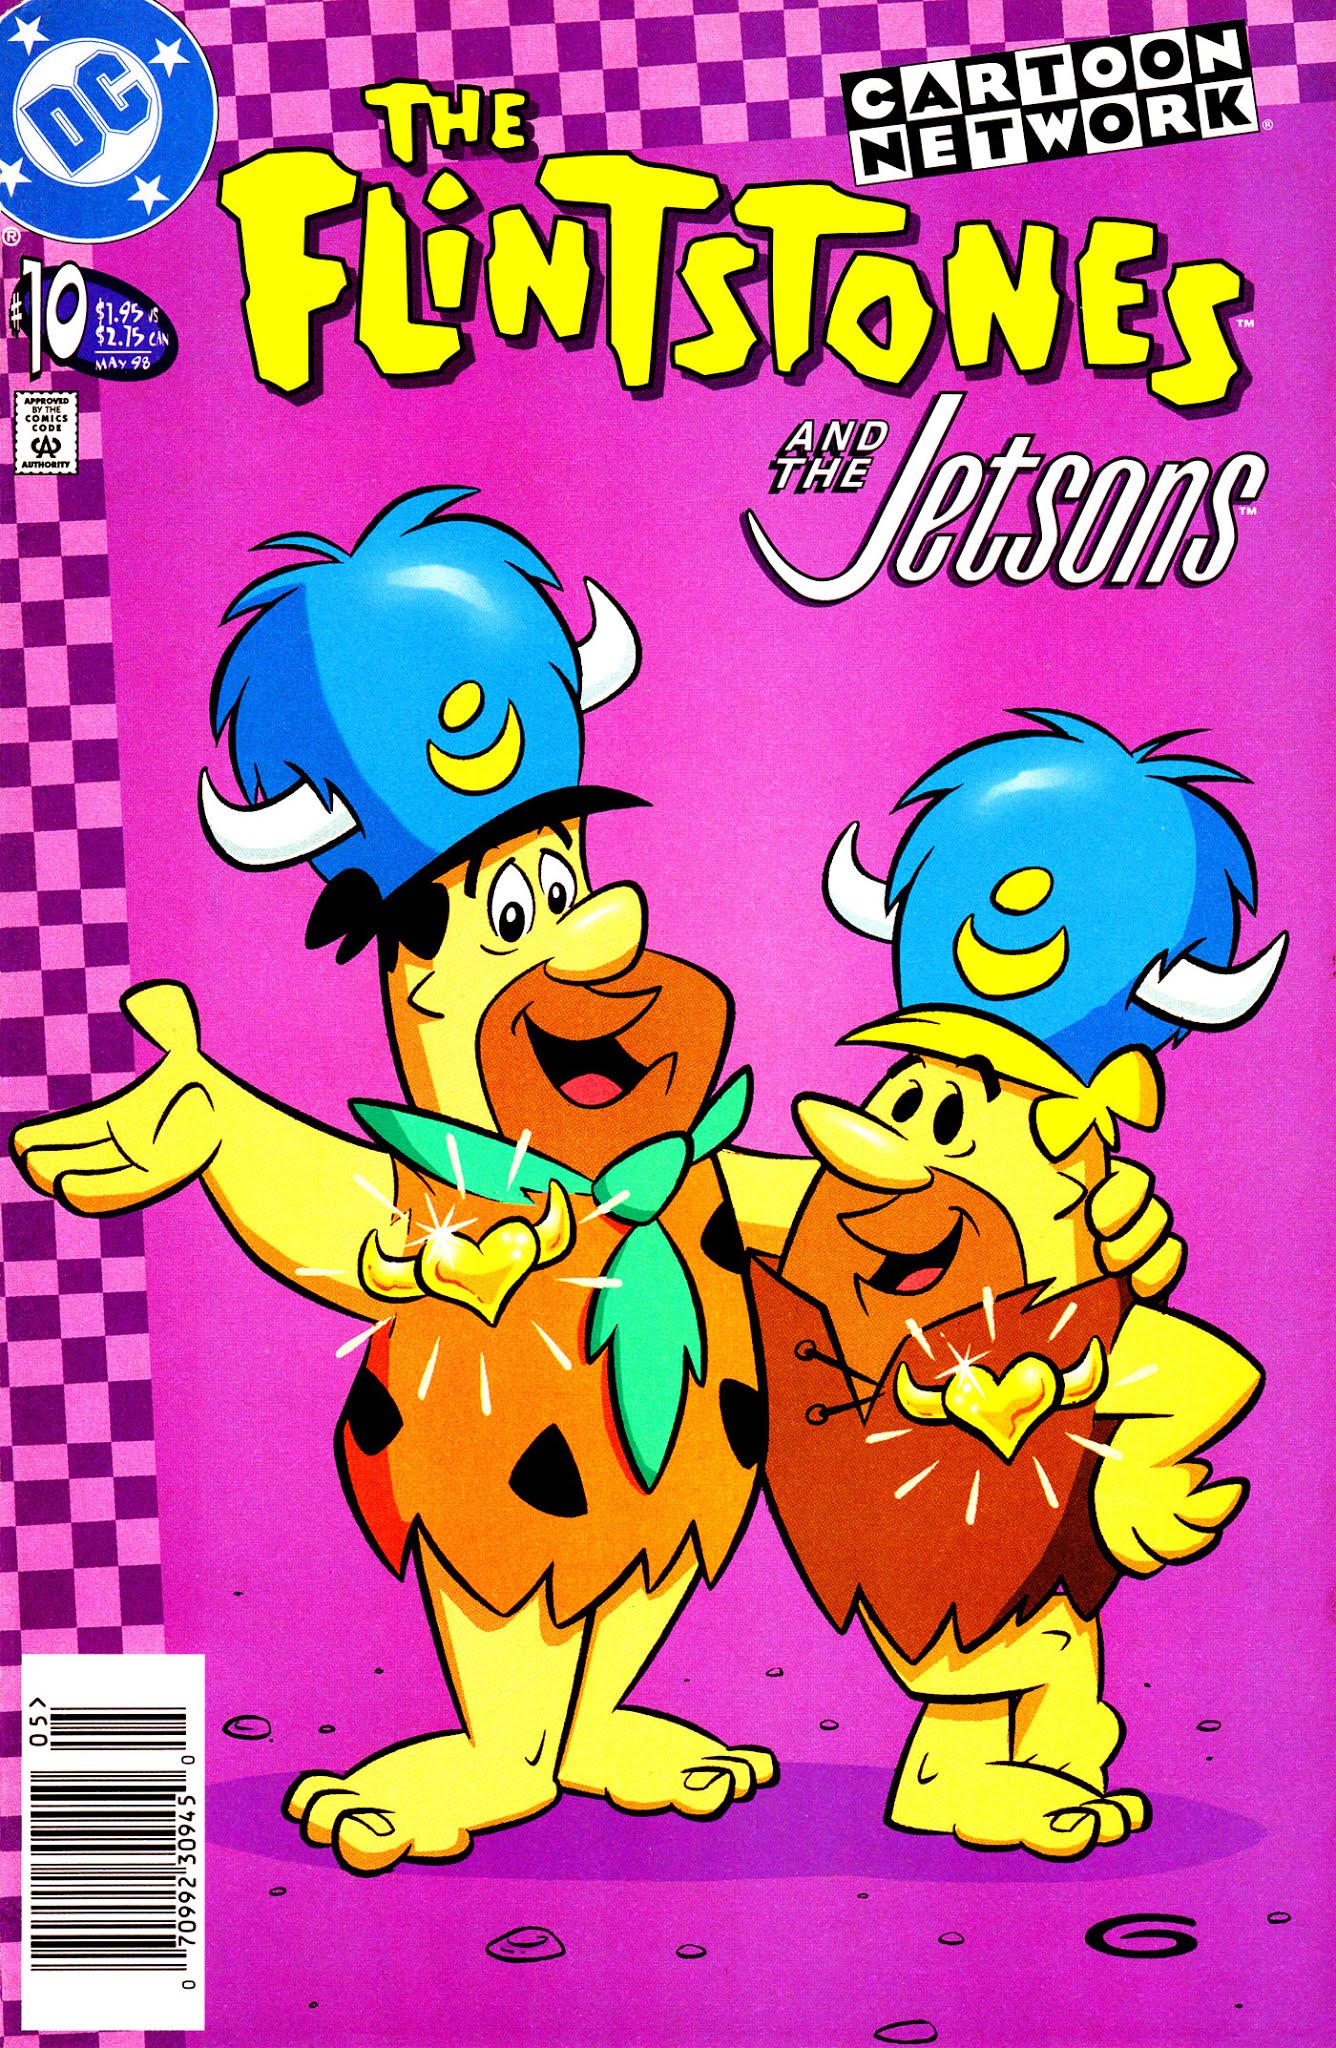 The Flintstones And The Jetsons Issue 10 | Read The Flintstones And The  Jetsons Issue 10 comic online in high quality. Read Full Comic online for  free - Read comics online in